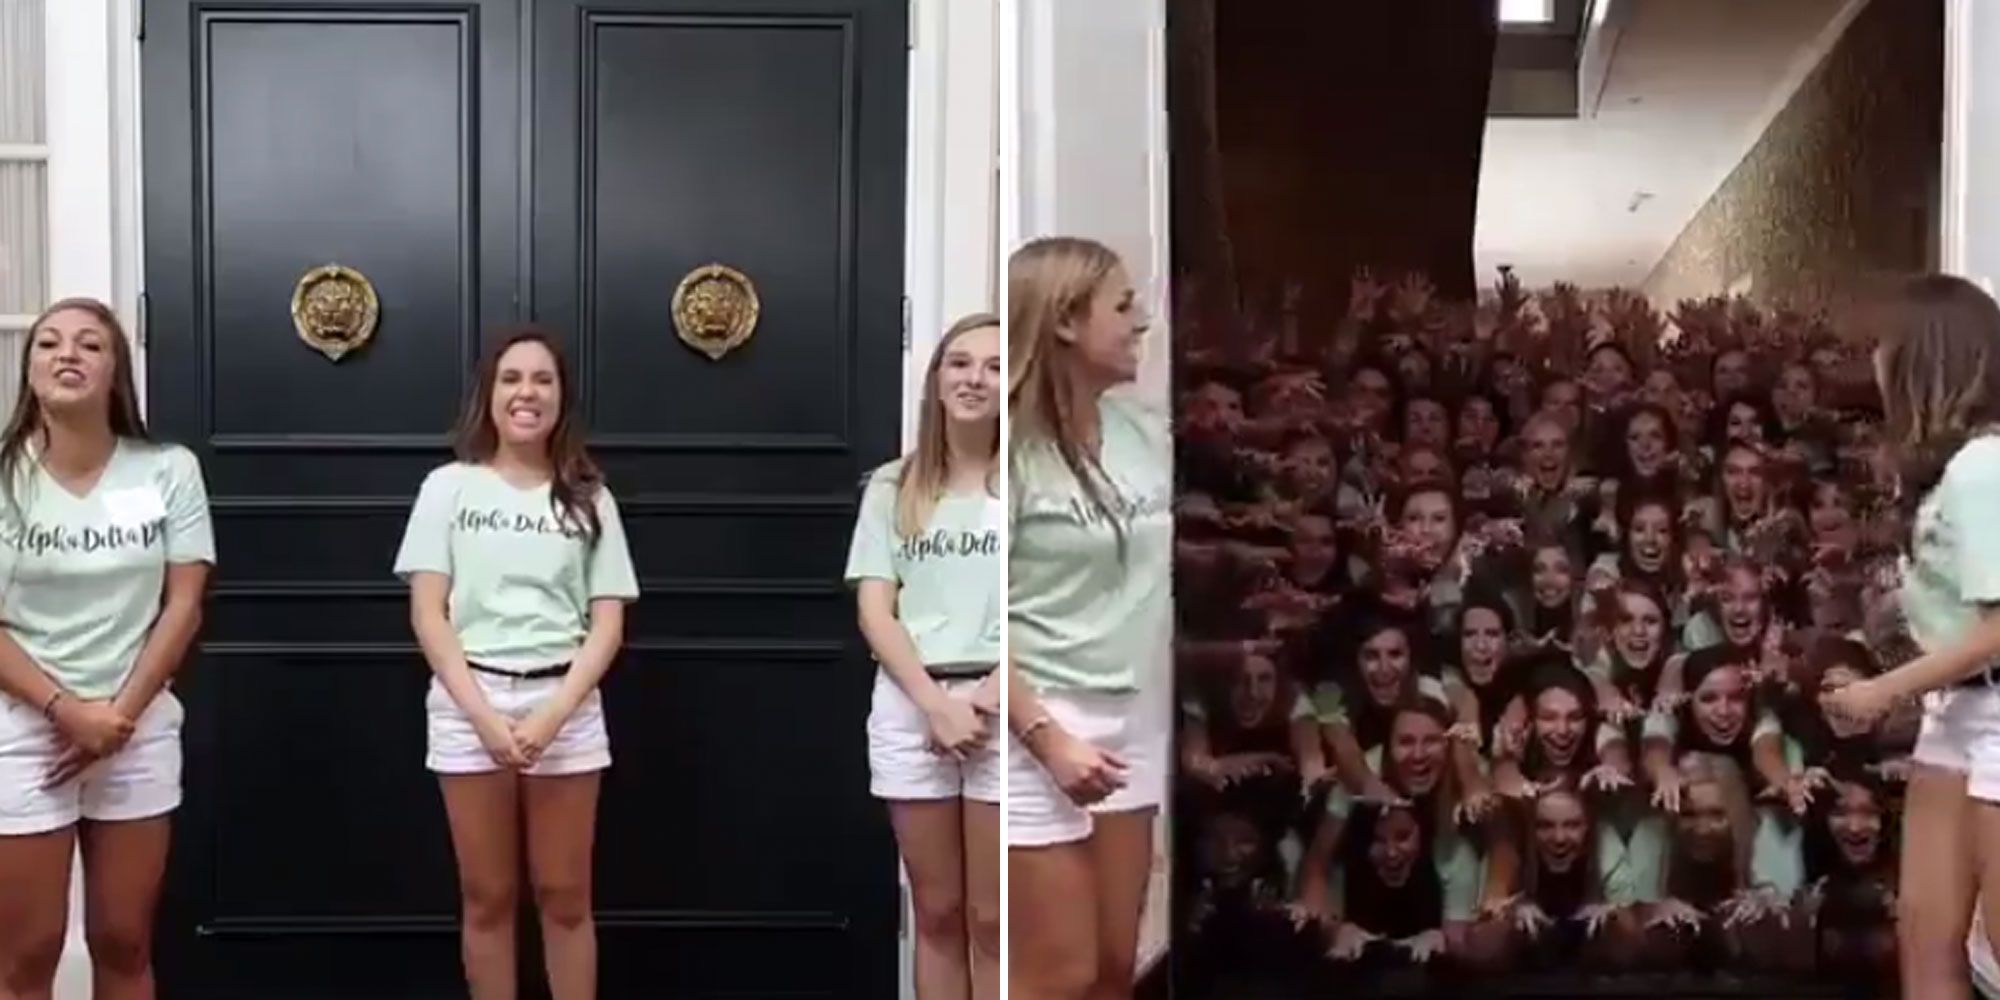 Oh Relax, That Viral Sorority Recruitment Video Isnt Nearly as Scary as Everyone Says It Is